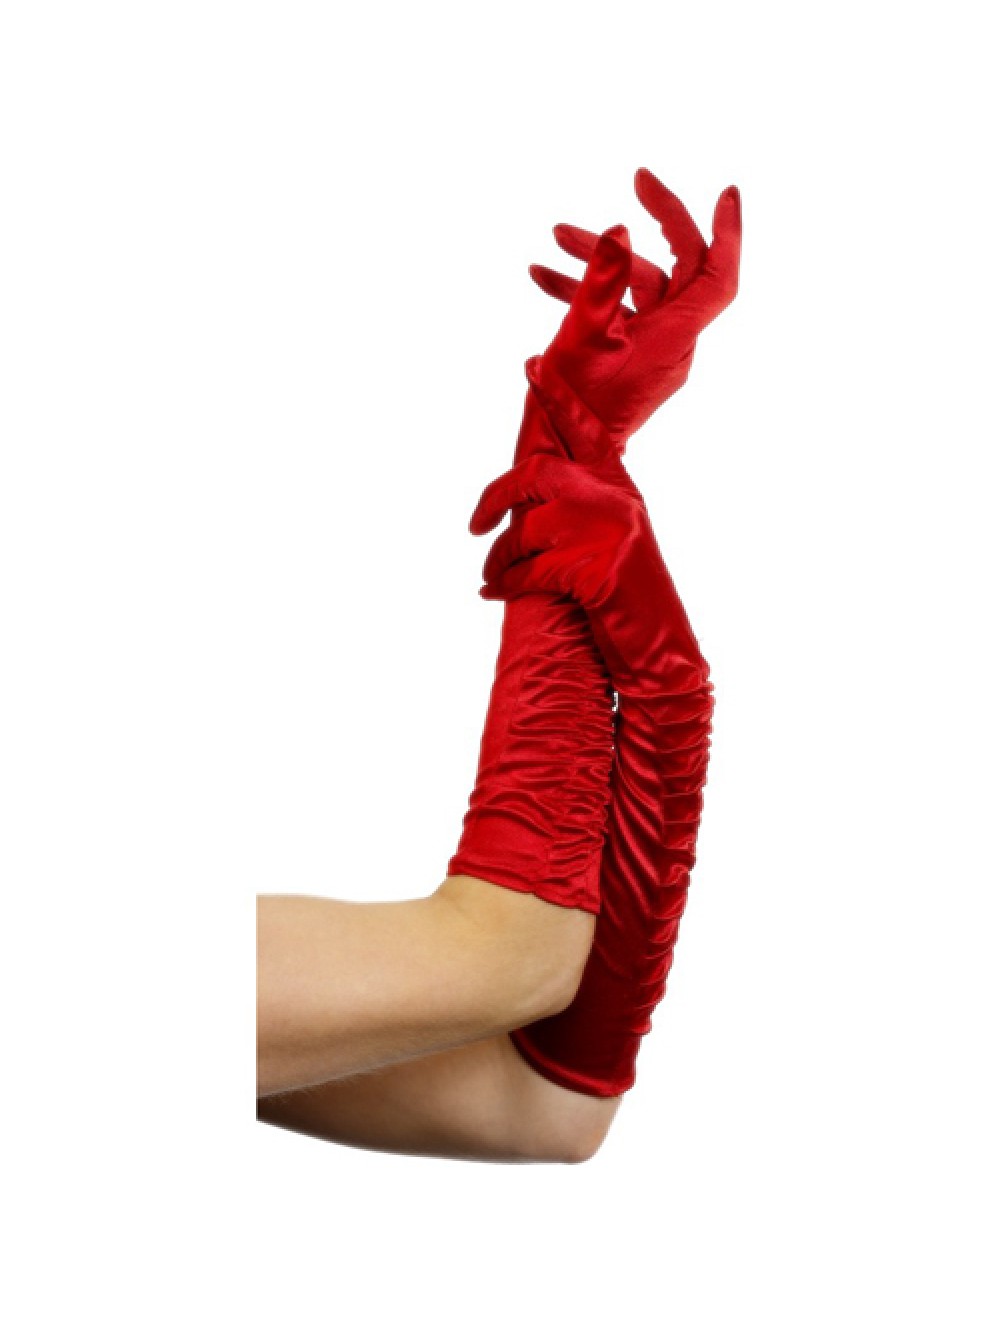 Temptress Gloves Red Long  46cm/18 inches 5020570263457